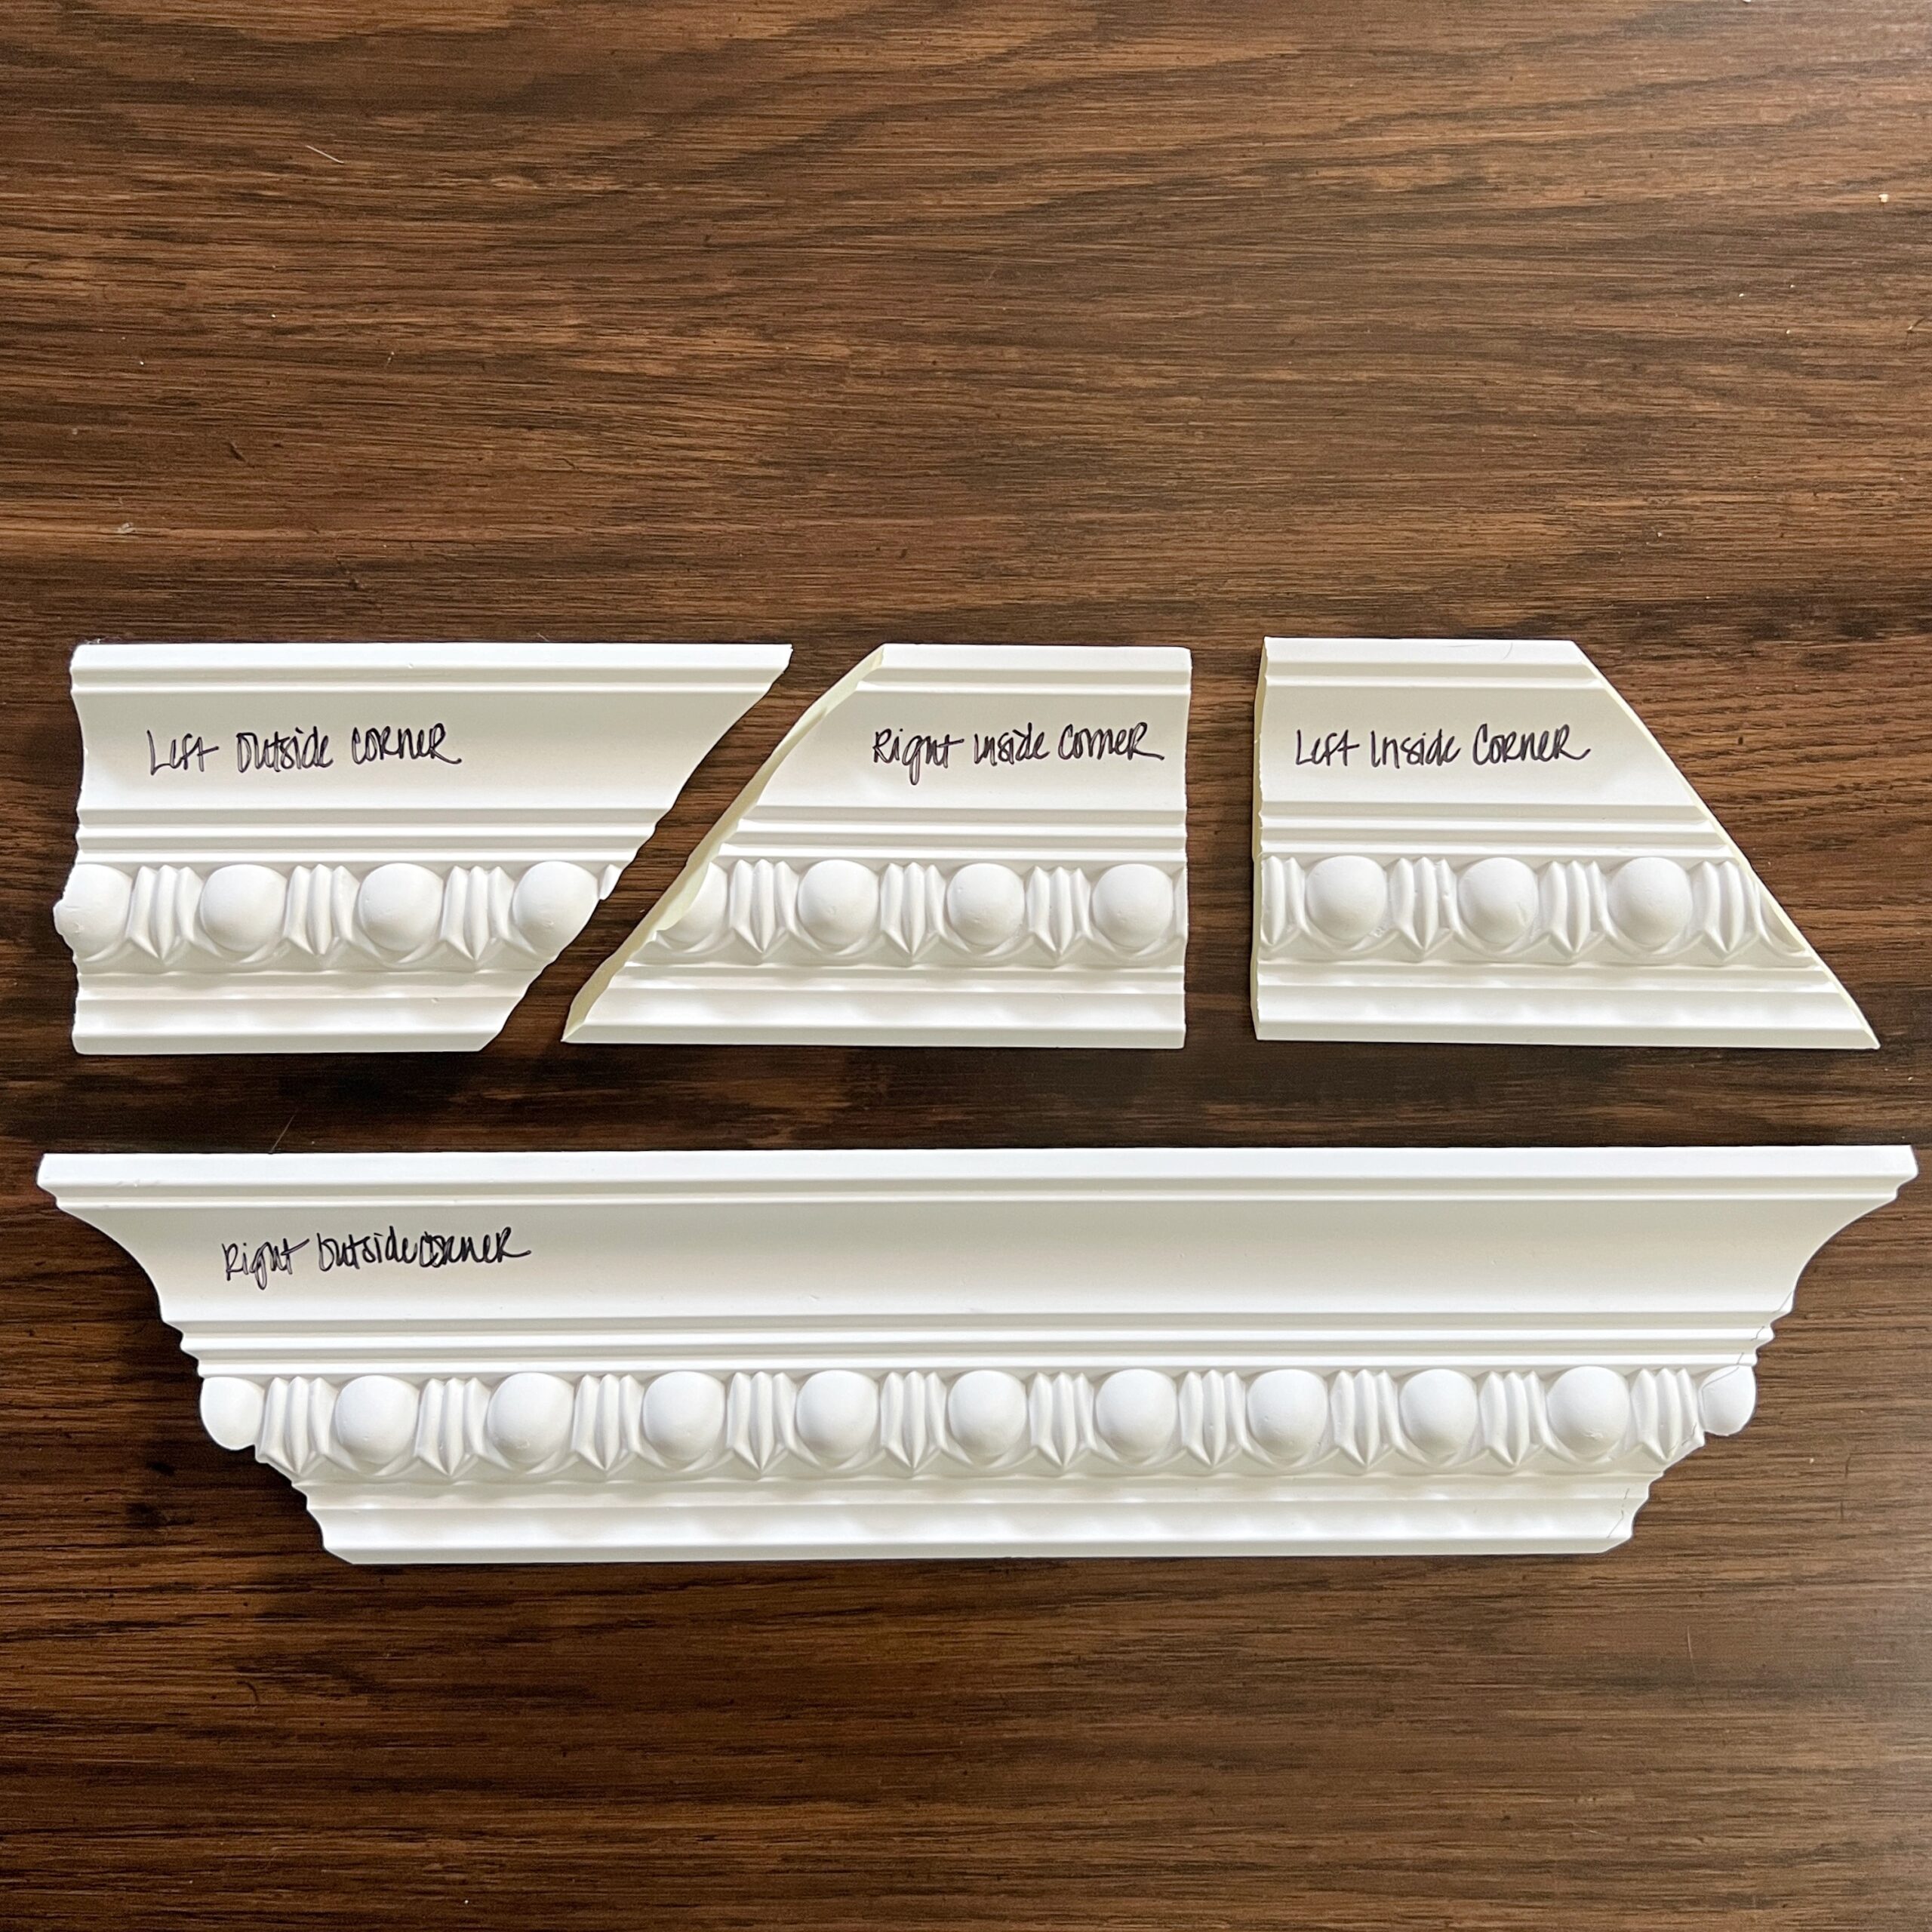 Four sample templates of crown moulding labeled left/right outside corner and left/right inside corner